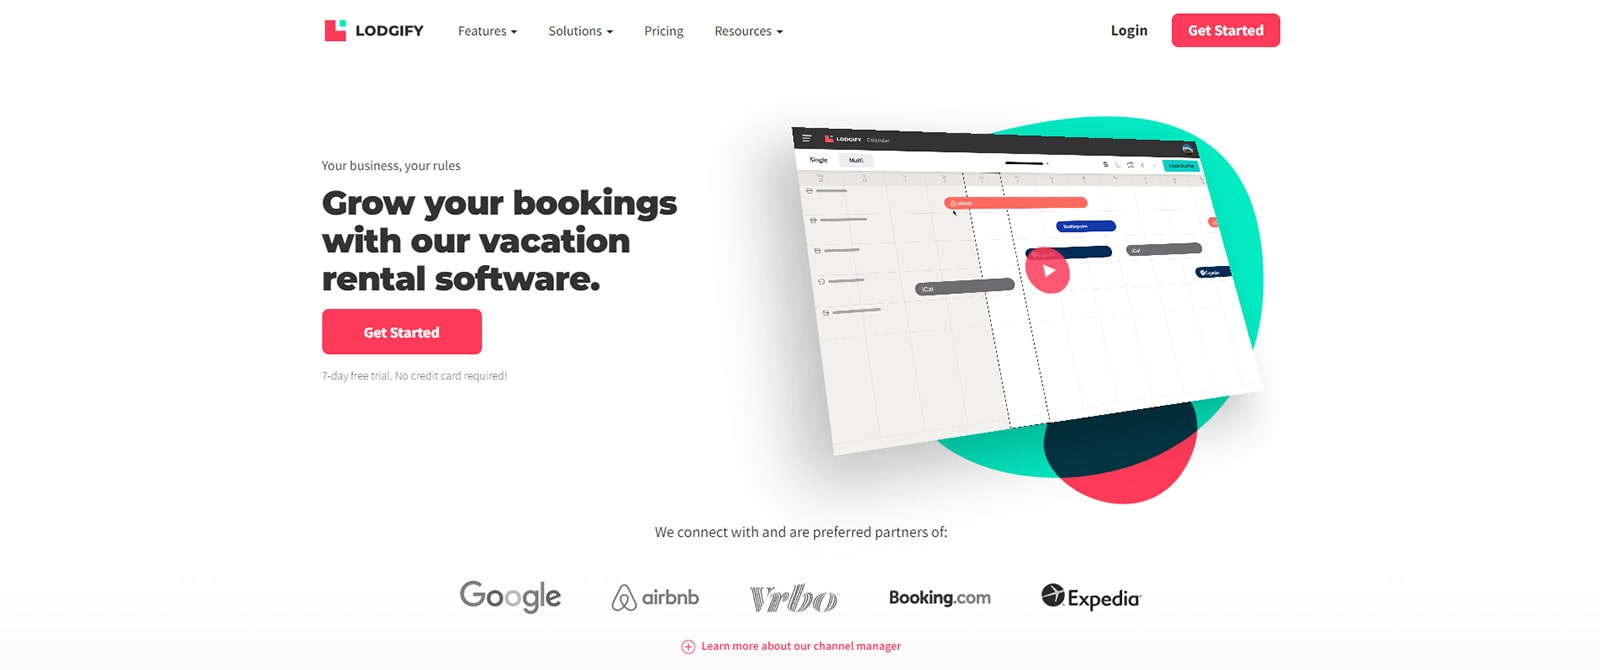 Figure of Lodgify, a flexible customization solution for vacation rentals with a range of responsive website themes.